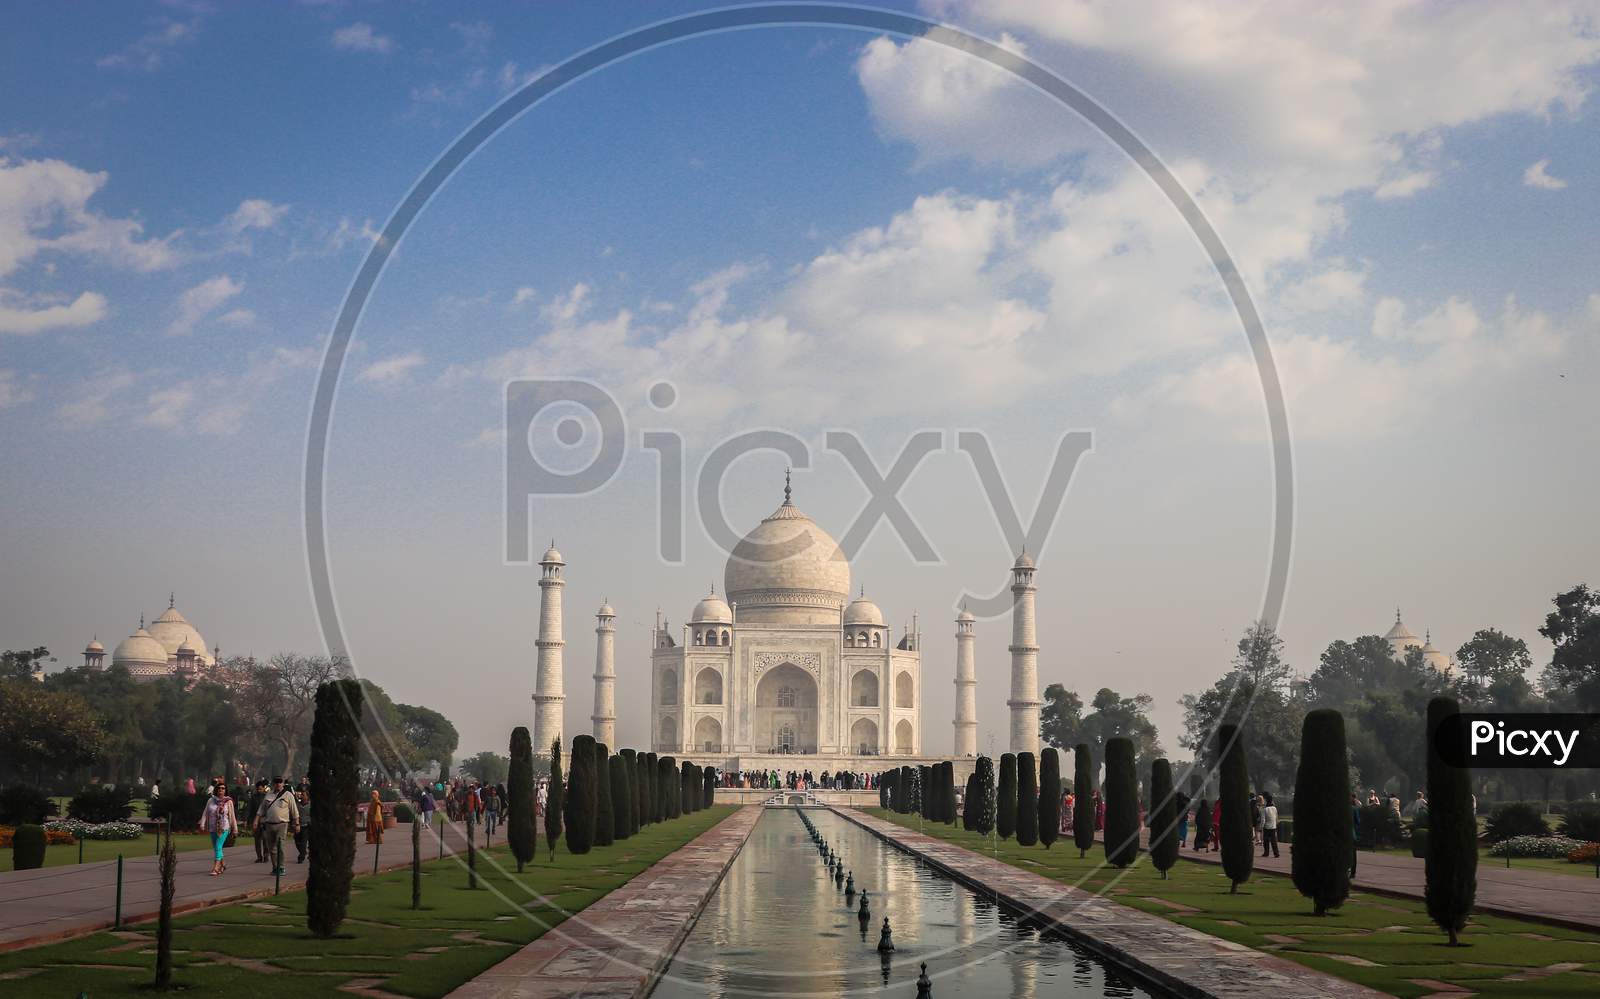 Tajmahal One Of The Seven Wonders Of World Image With Blue Sky Background